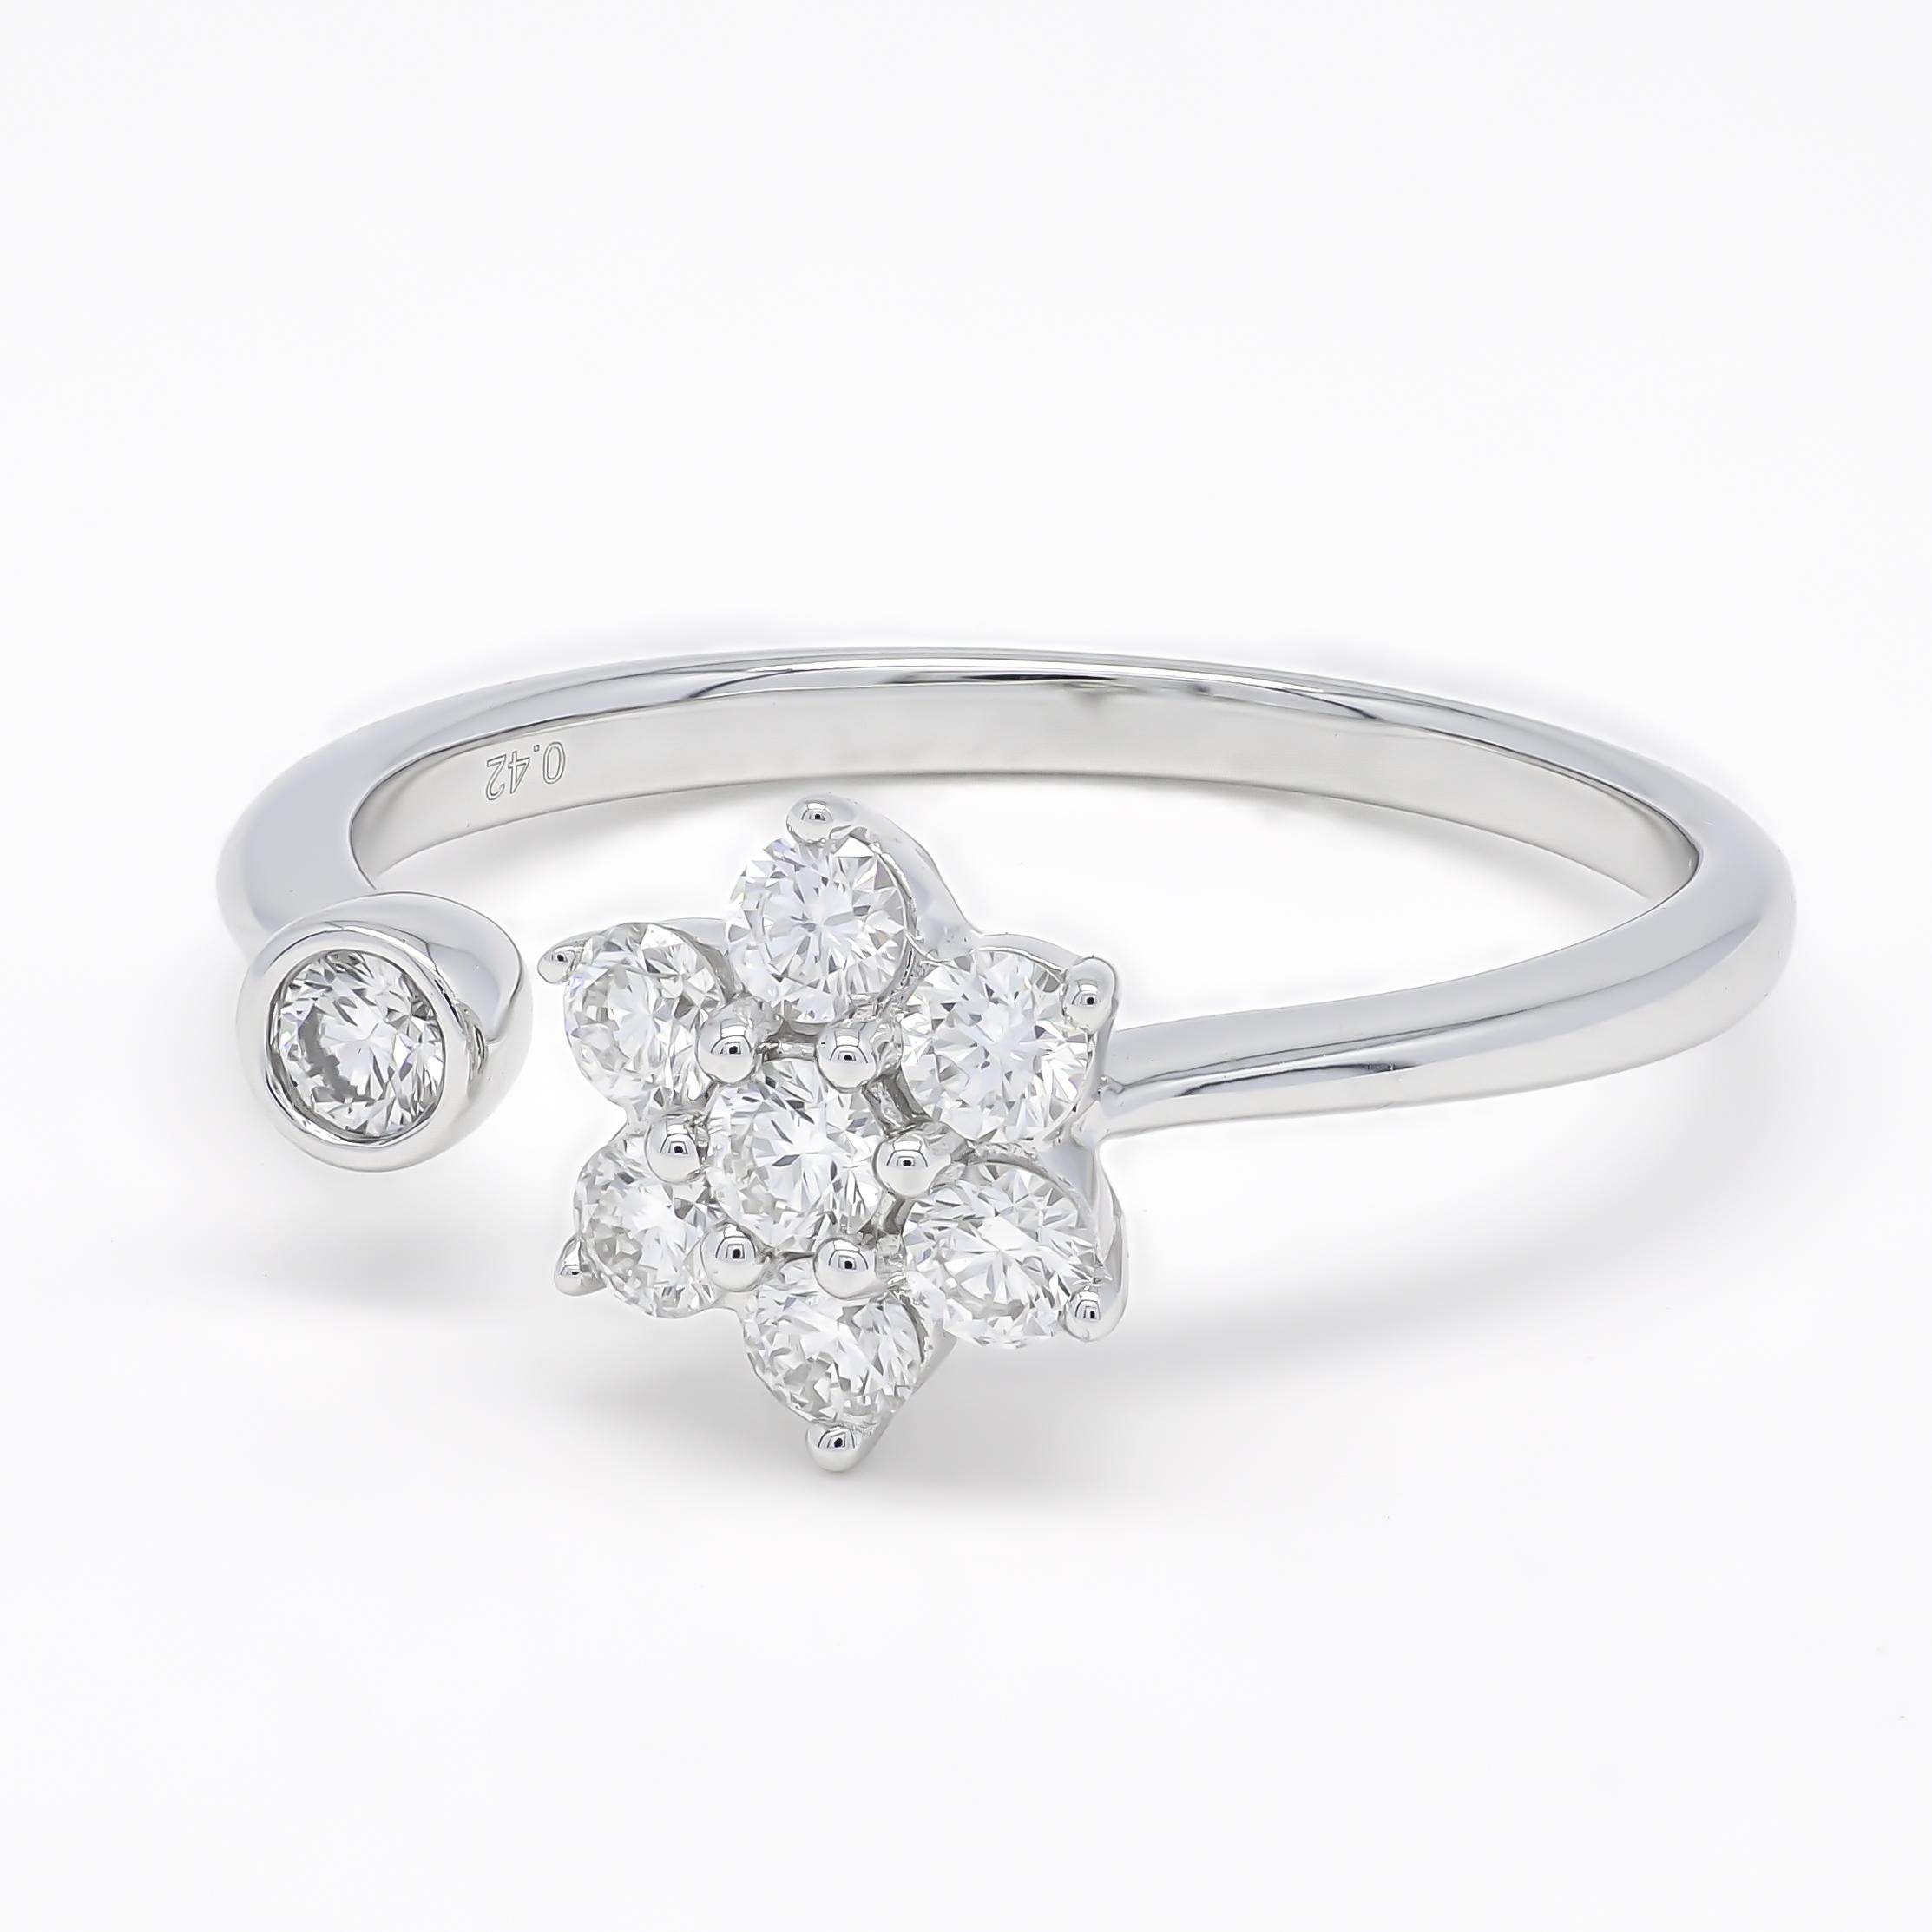 The solitaire cluster open shank modern ring is a contemporary take on the classic solitaire engagement ring design. This ring features a cluster of smaller diamonds arranged in a flower shape, set in a sleek and open shank band.

The open shank